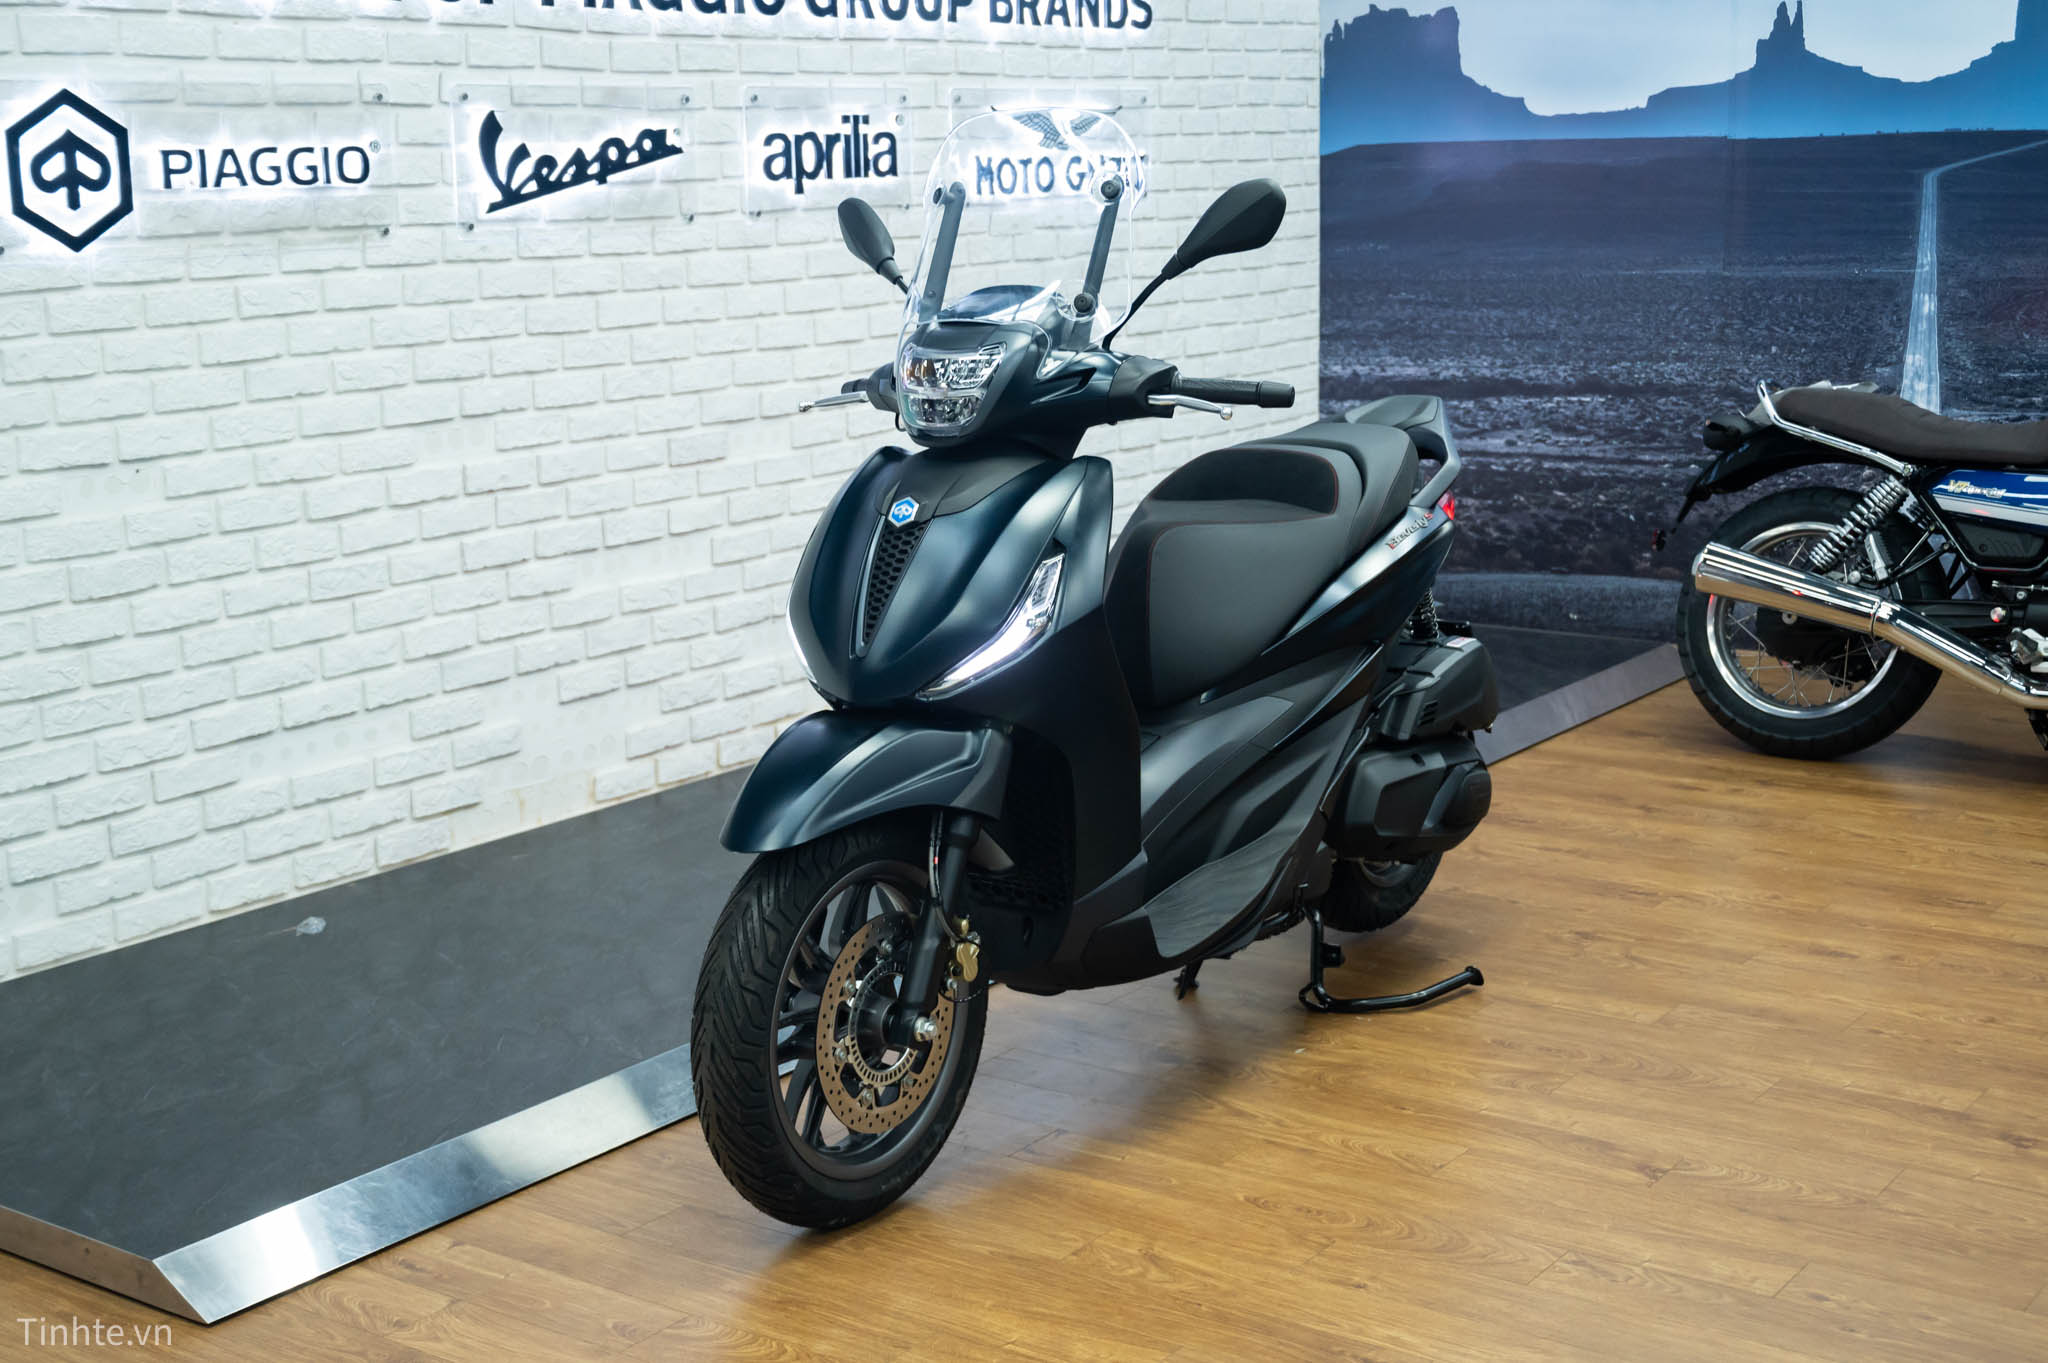 PIAGGIO BEVERLY 300 2011on Review  Specs  Prices  MCN